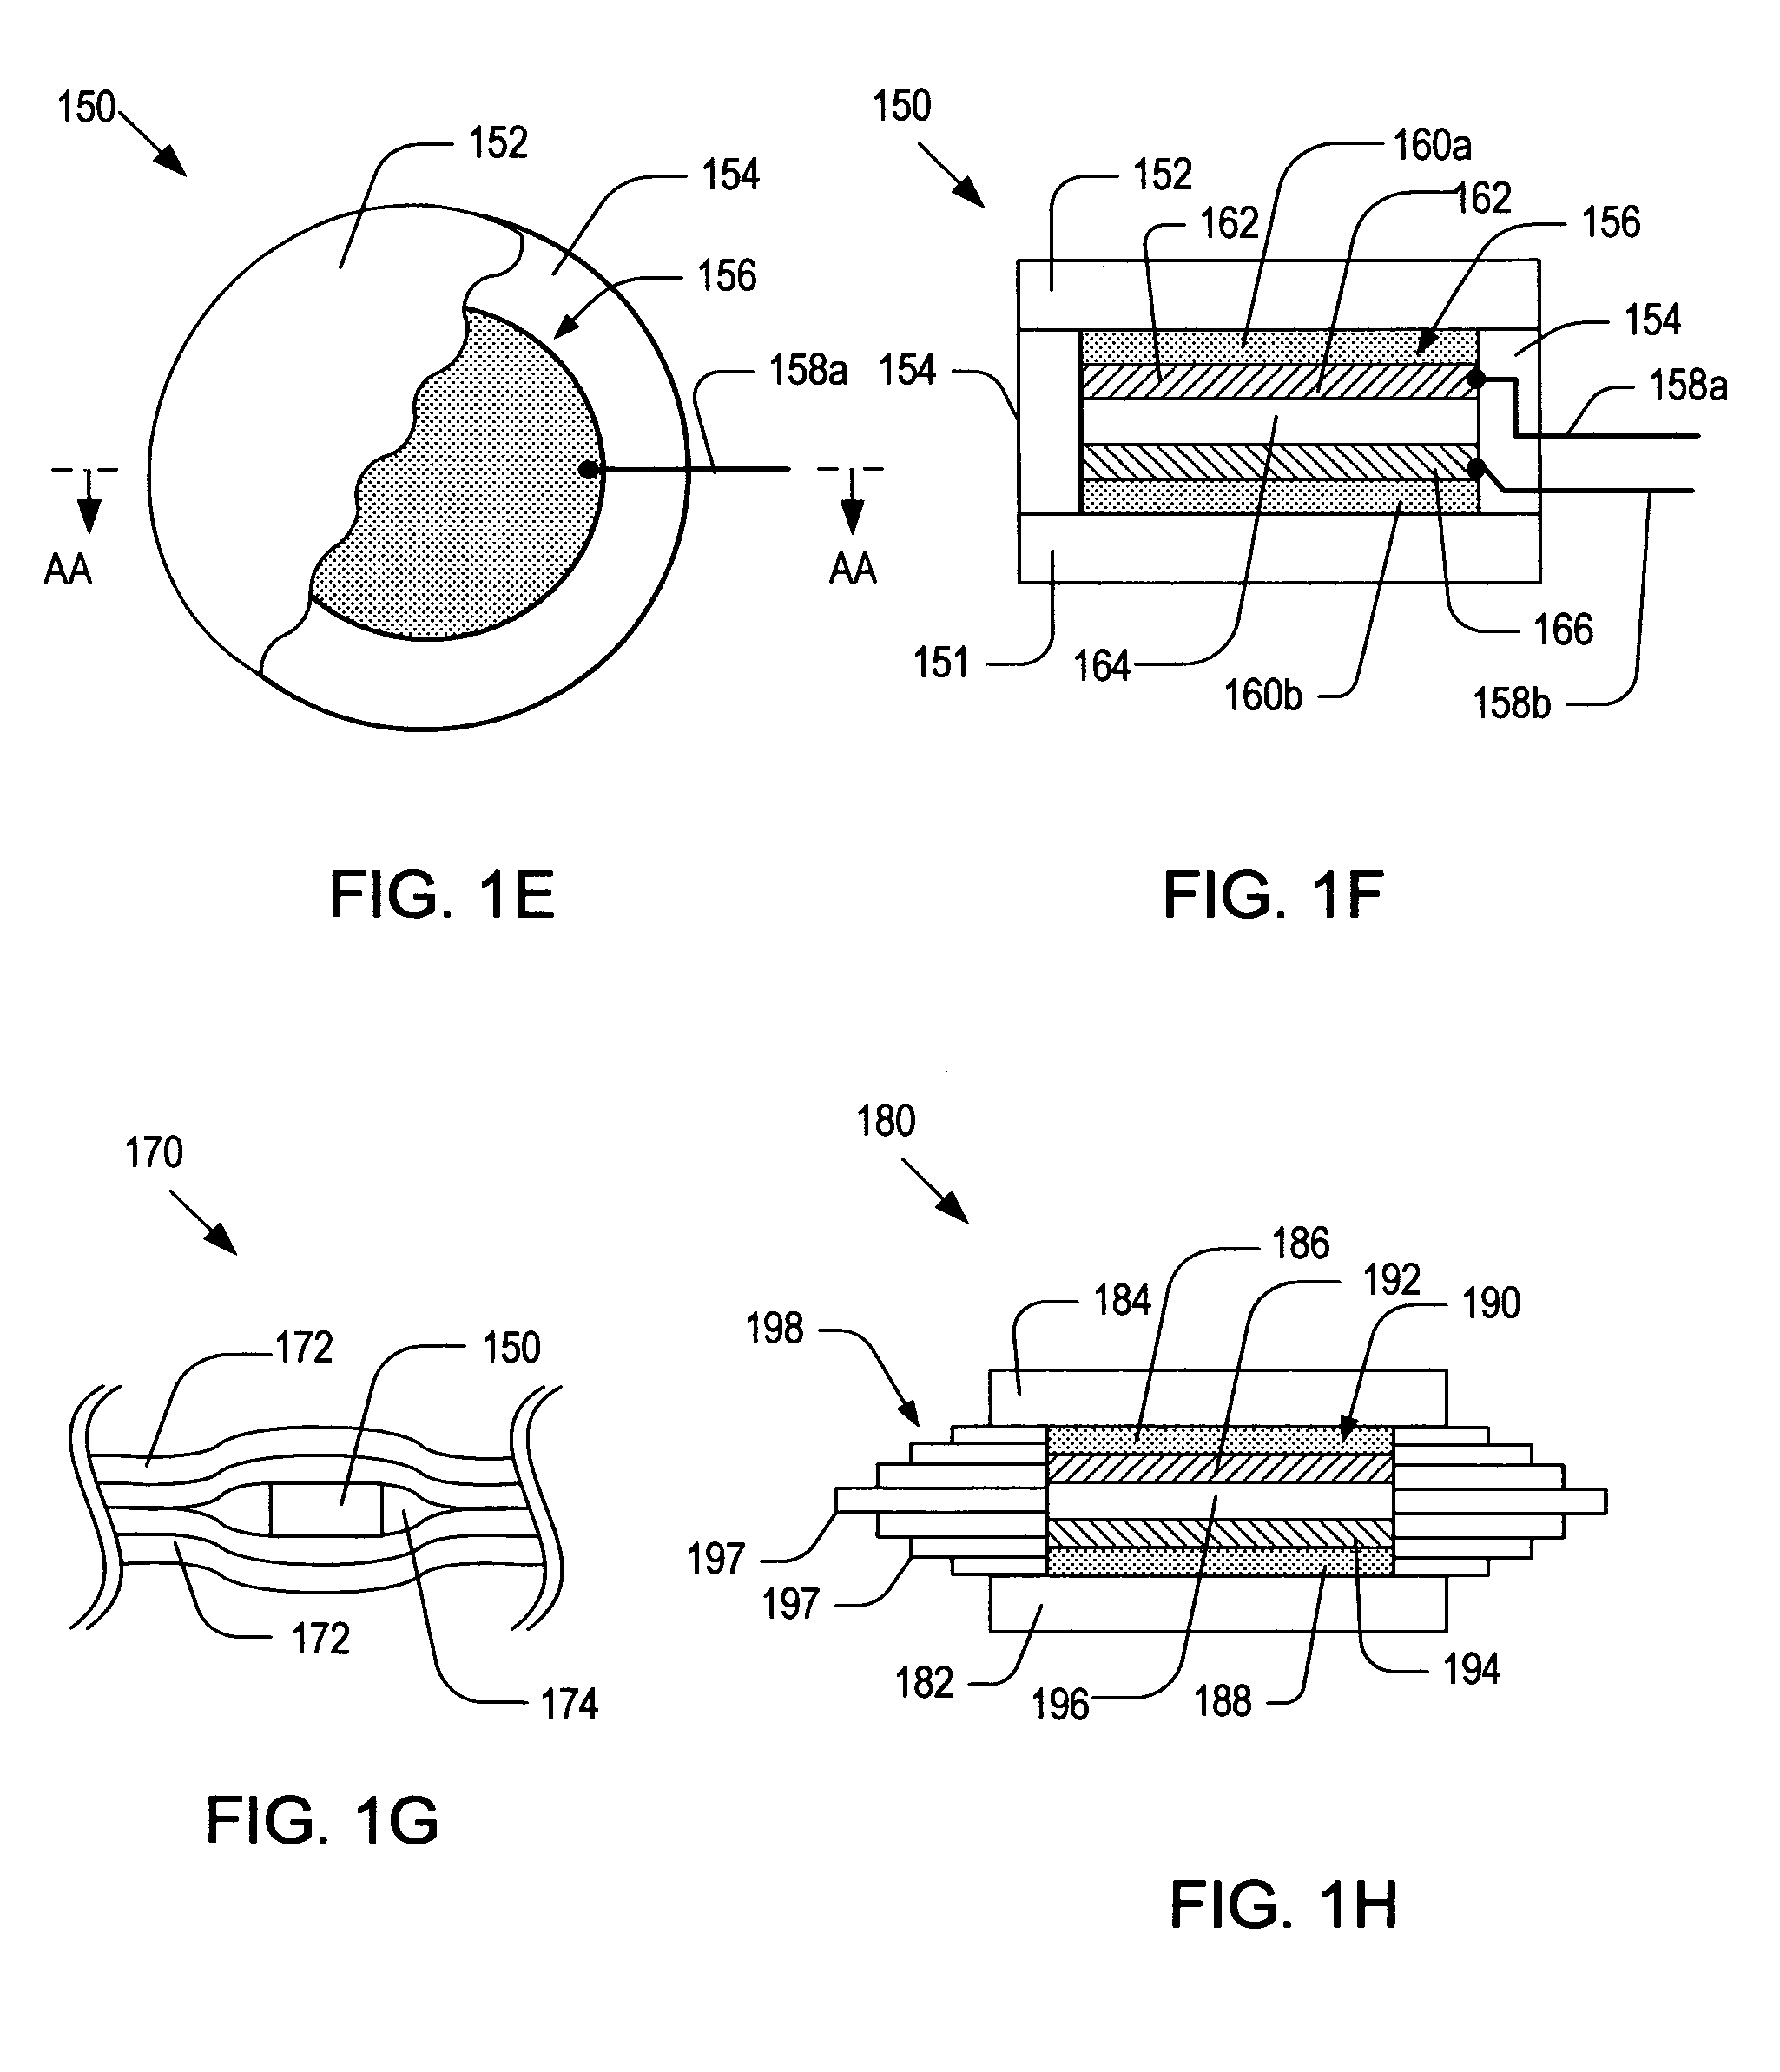 System for diagnosing and monitoring structural health conditions